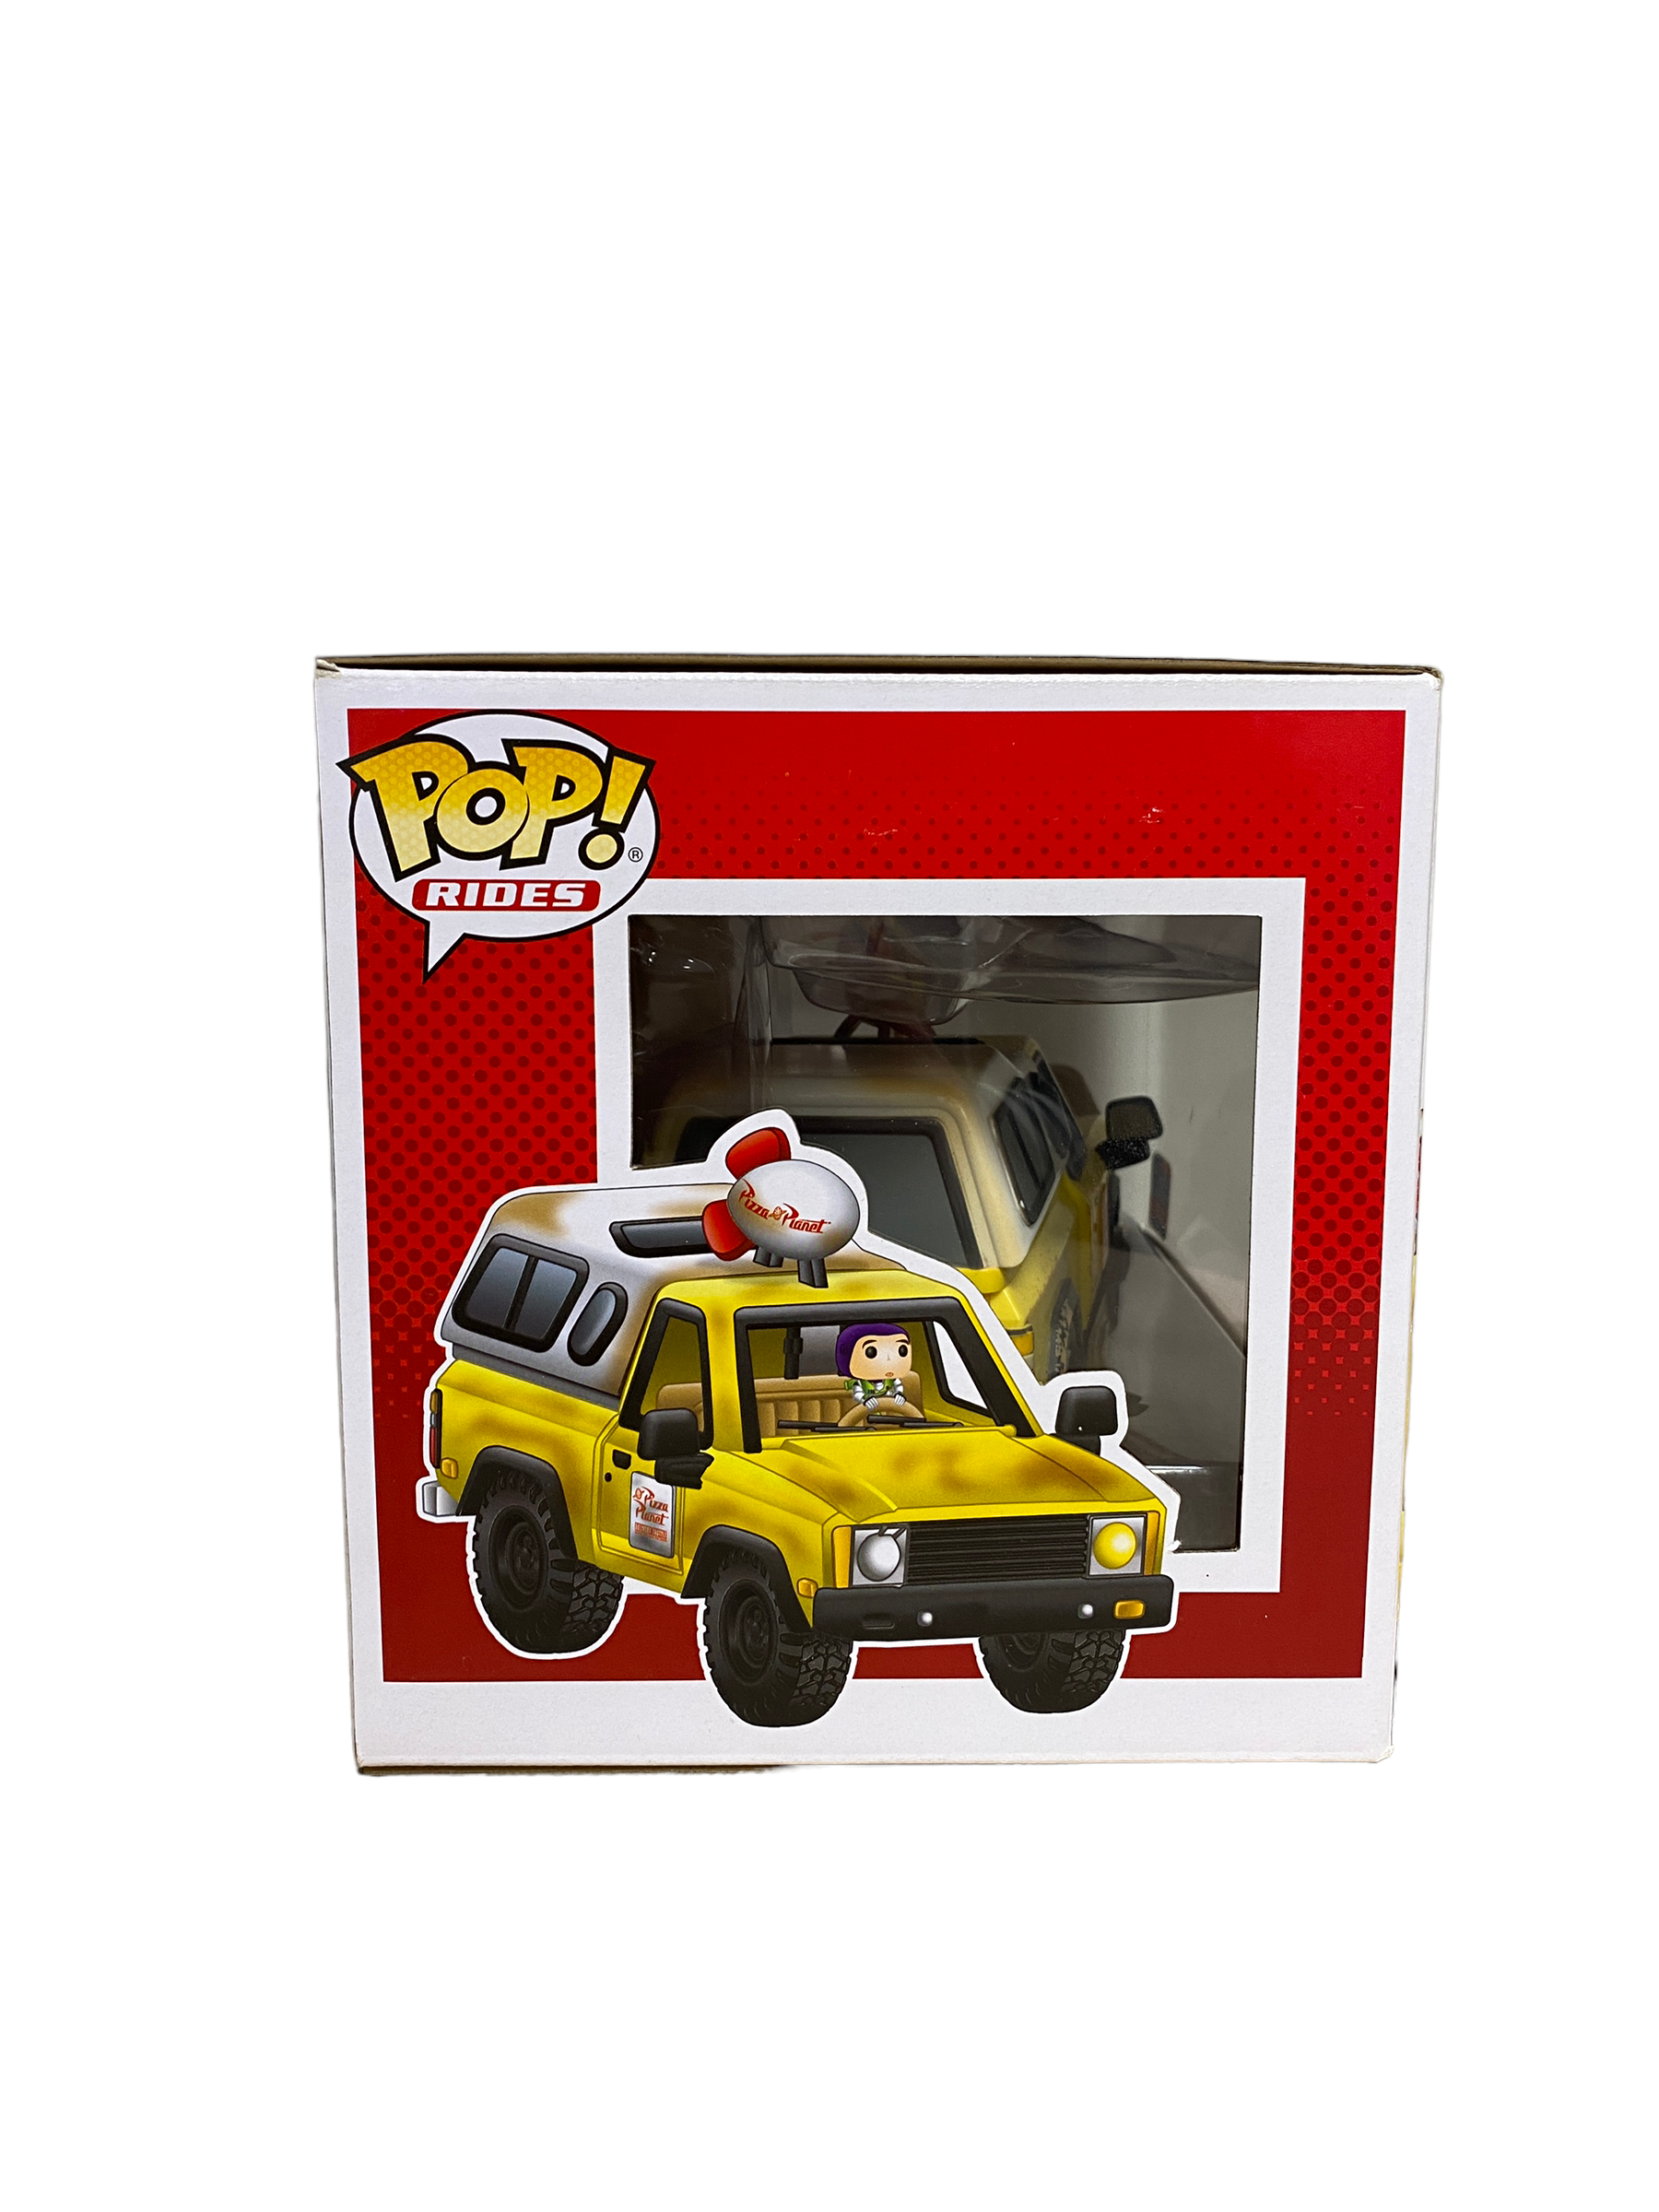 Pizza Planet Truck and Buzz Lightyear #52 Funko Pop Ride! - Toy Story - NYCC 2018 Shared Exclusive - Condition 8.5/10